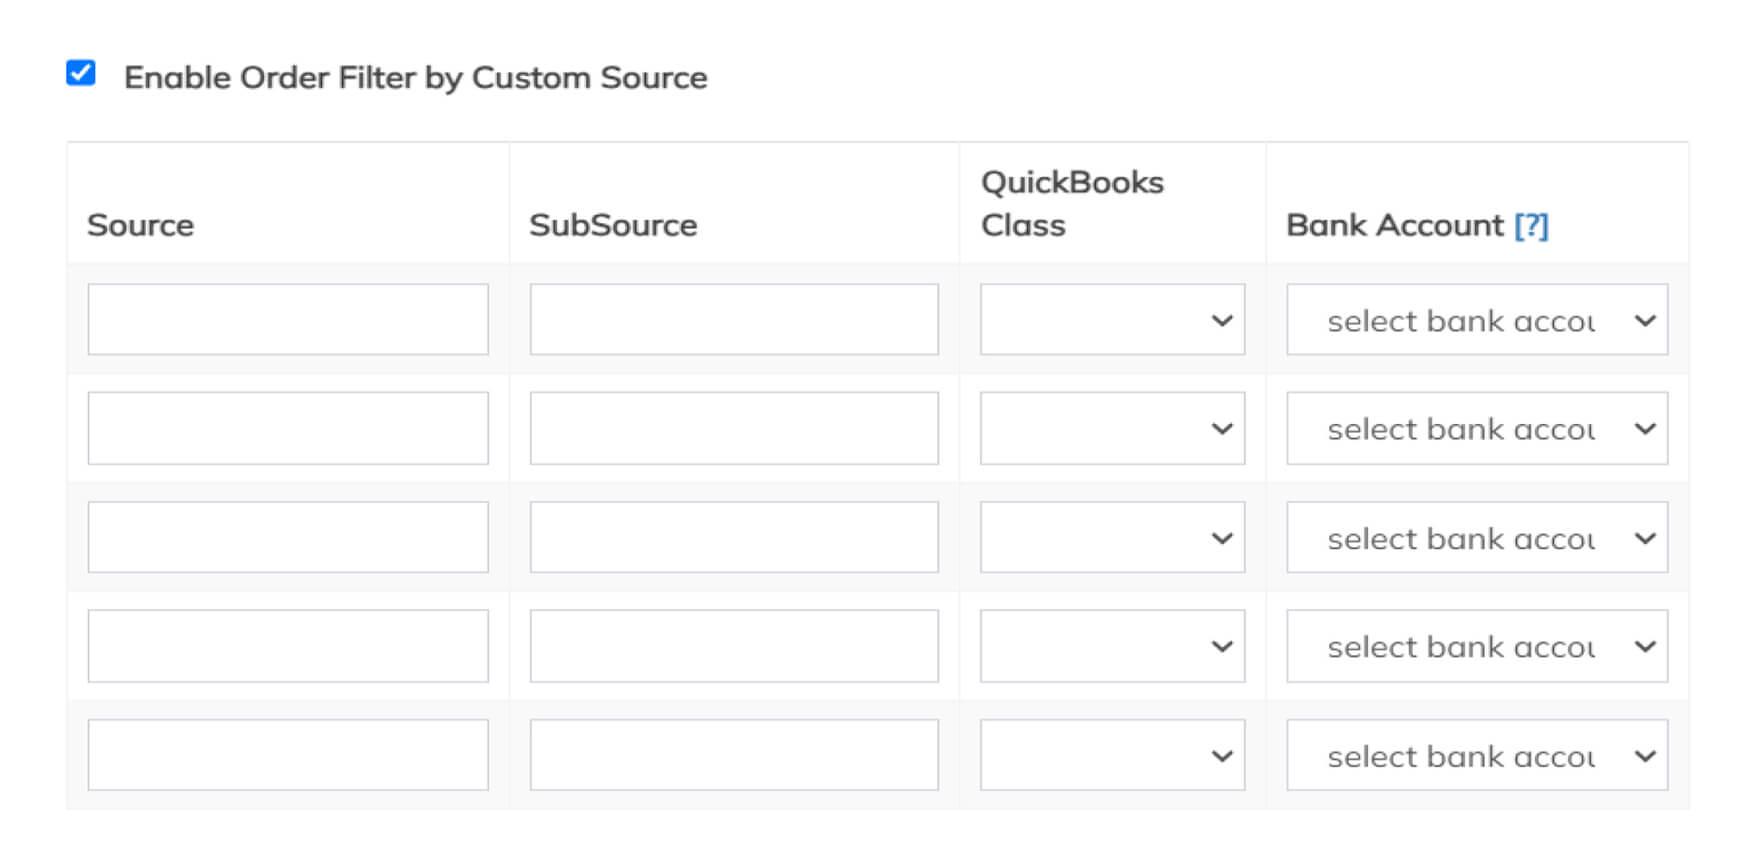 Enable Order Filter by custom source subsource: